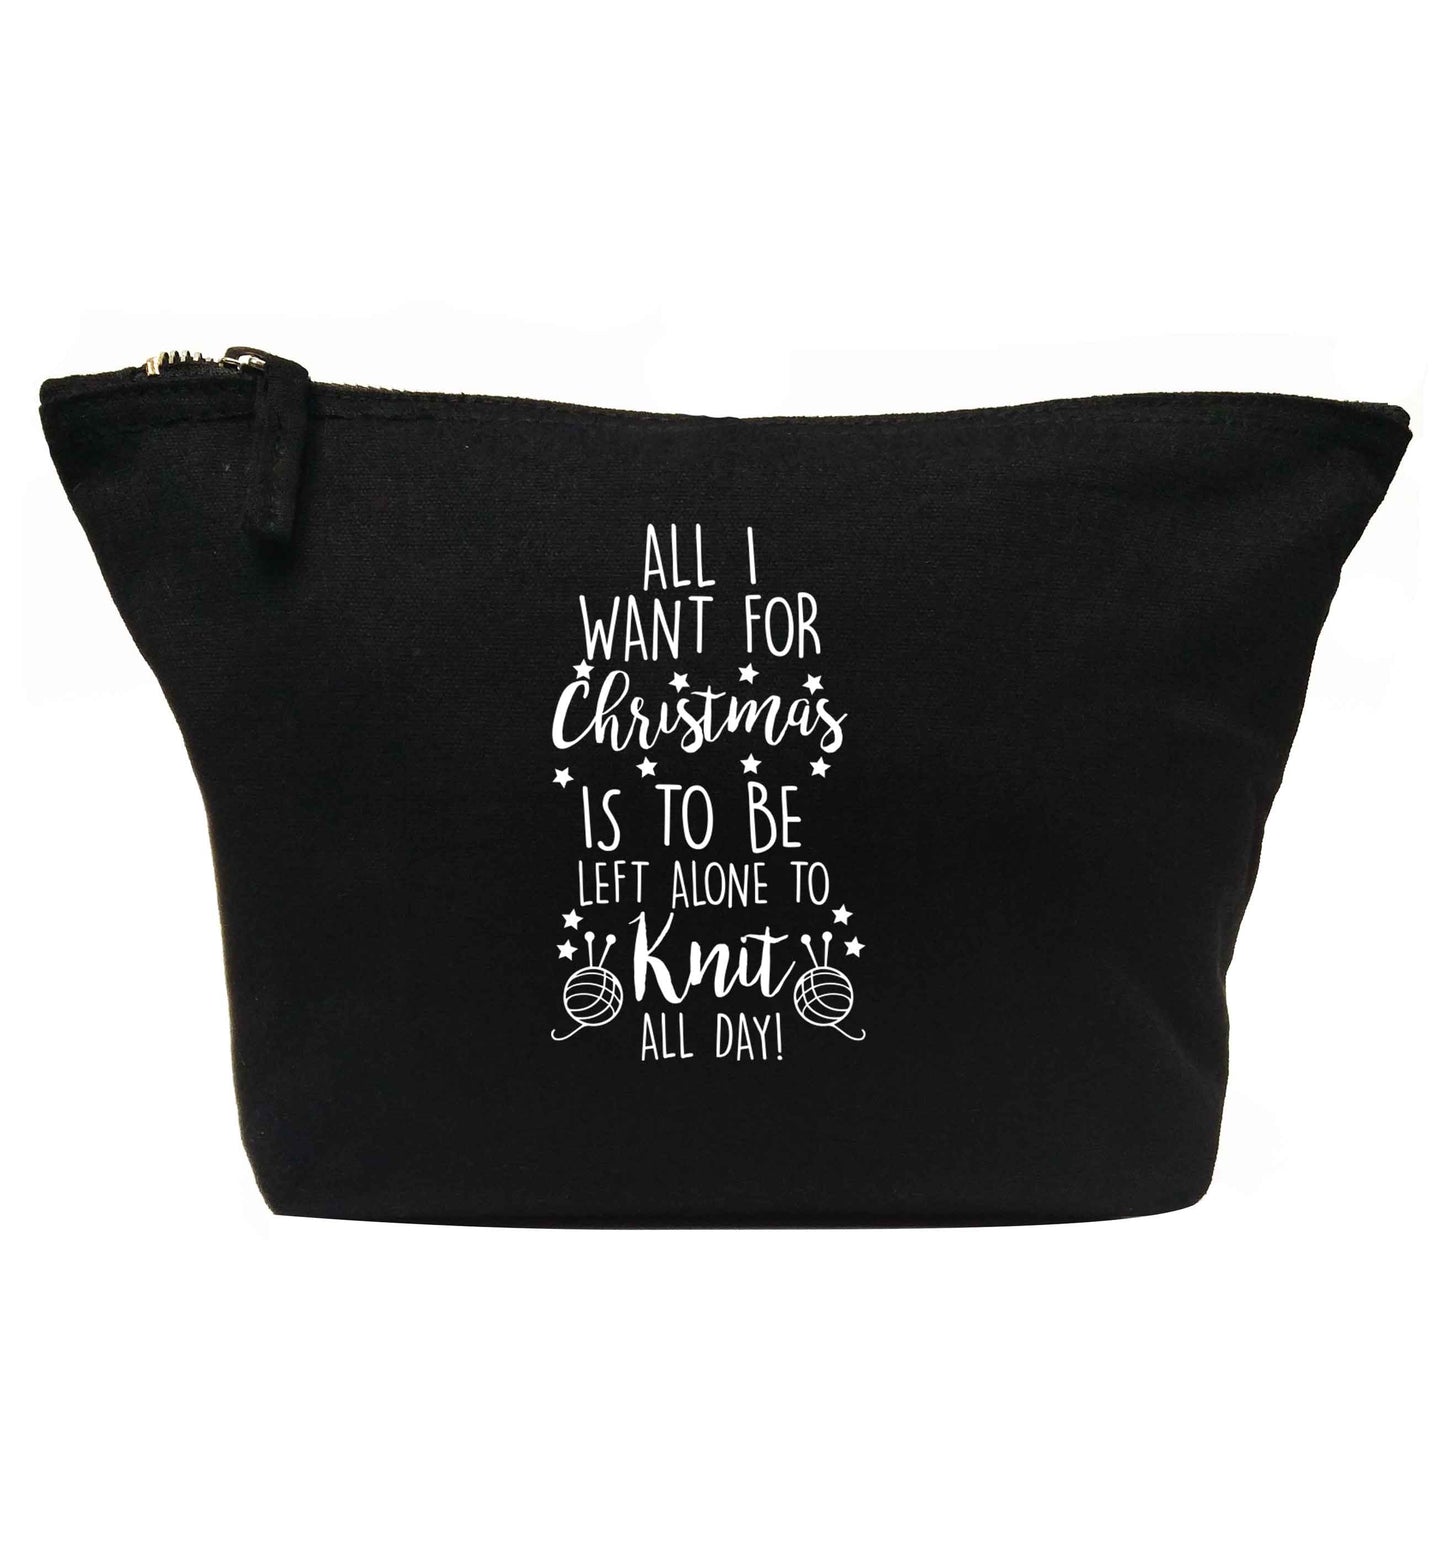 All I want for Christmas is to be left alone to knit all day | makeup / wash bag